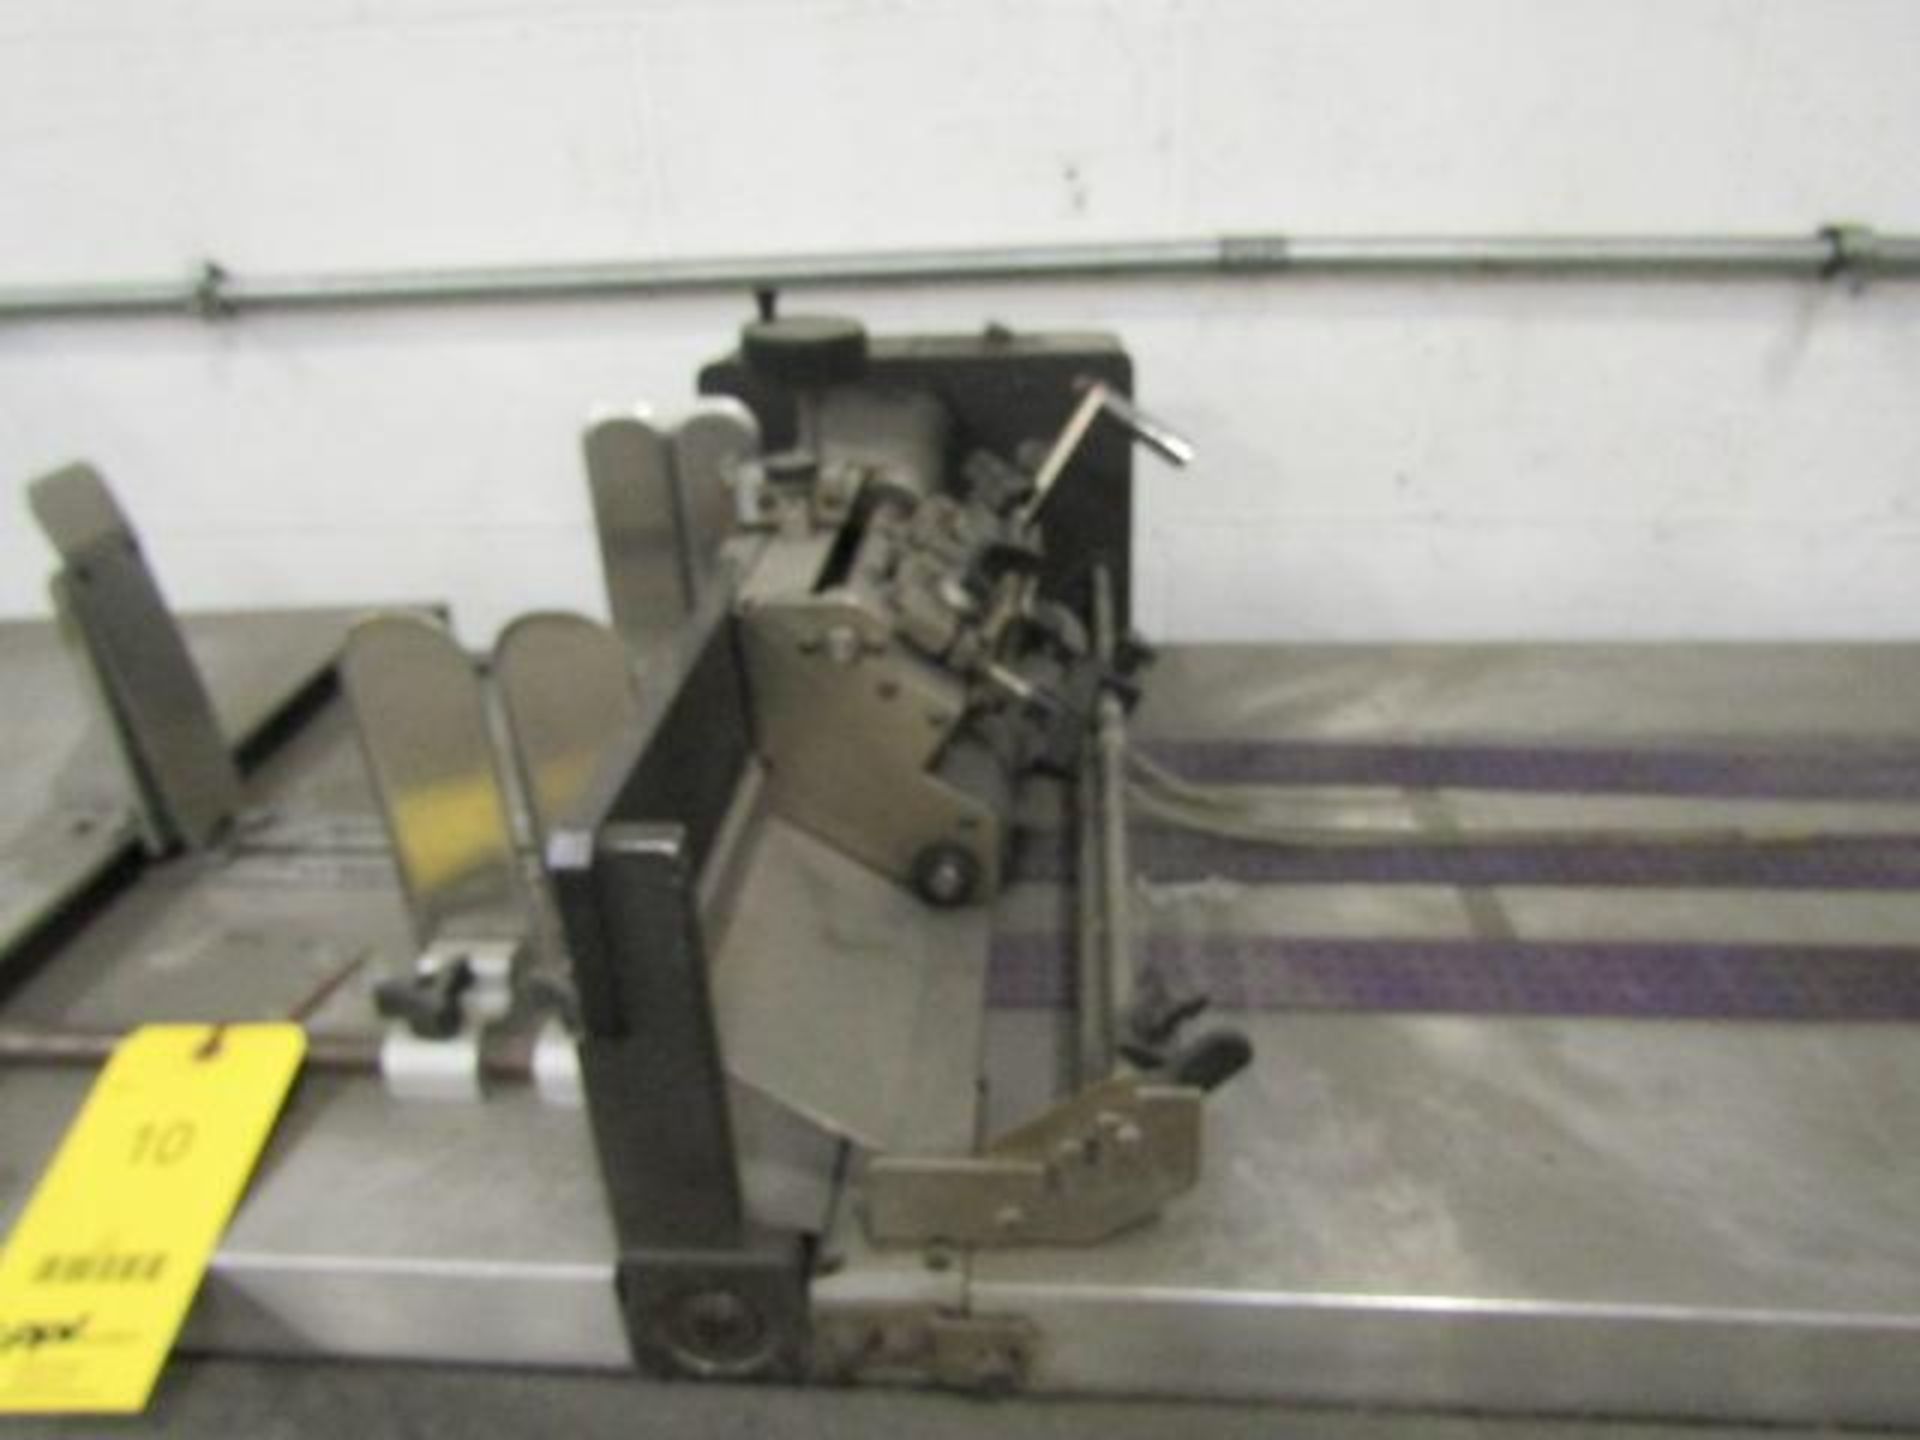 Cheshire Ink Jet Base Model 987000-82, S/N 43885 - Image 2 of 3